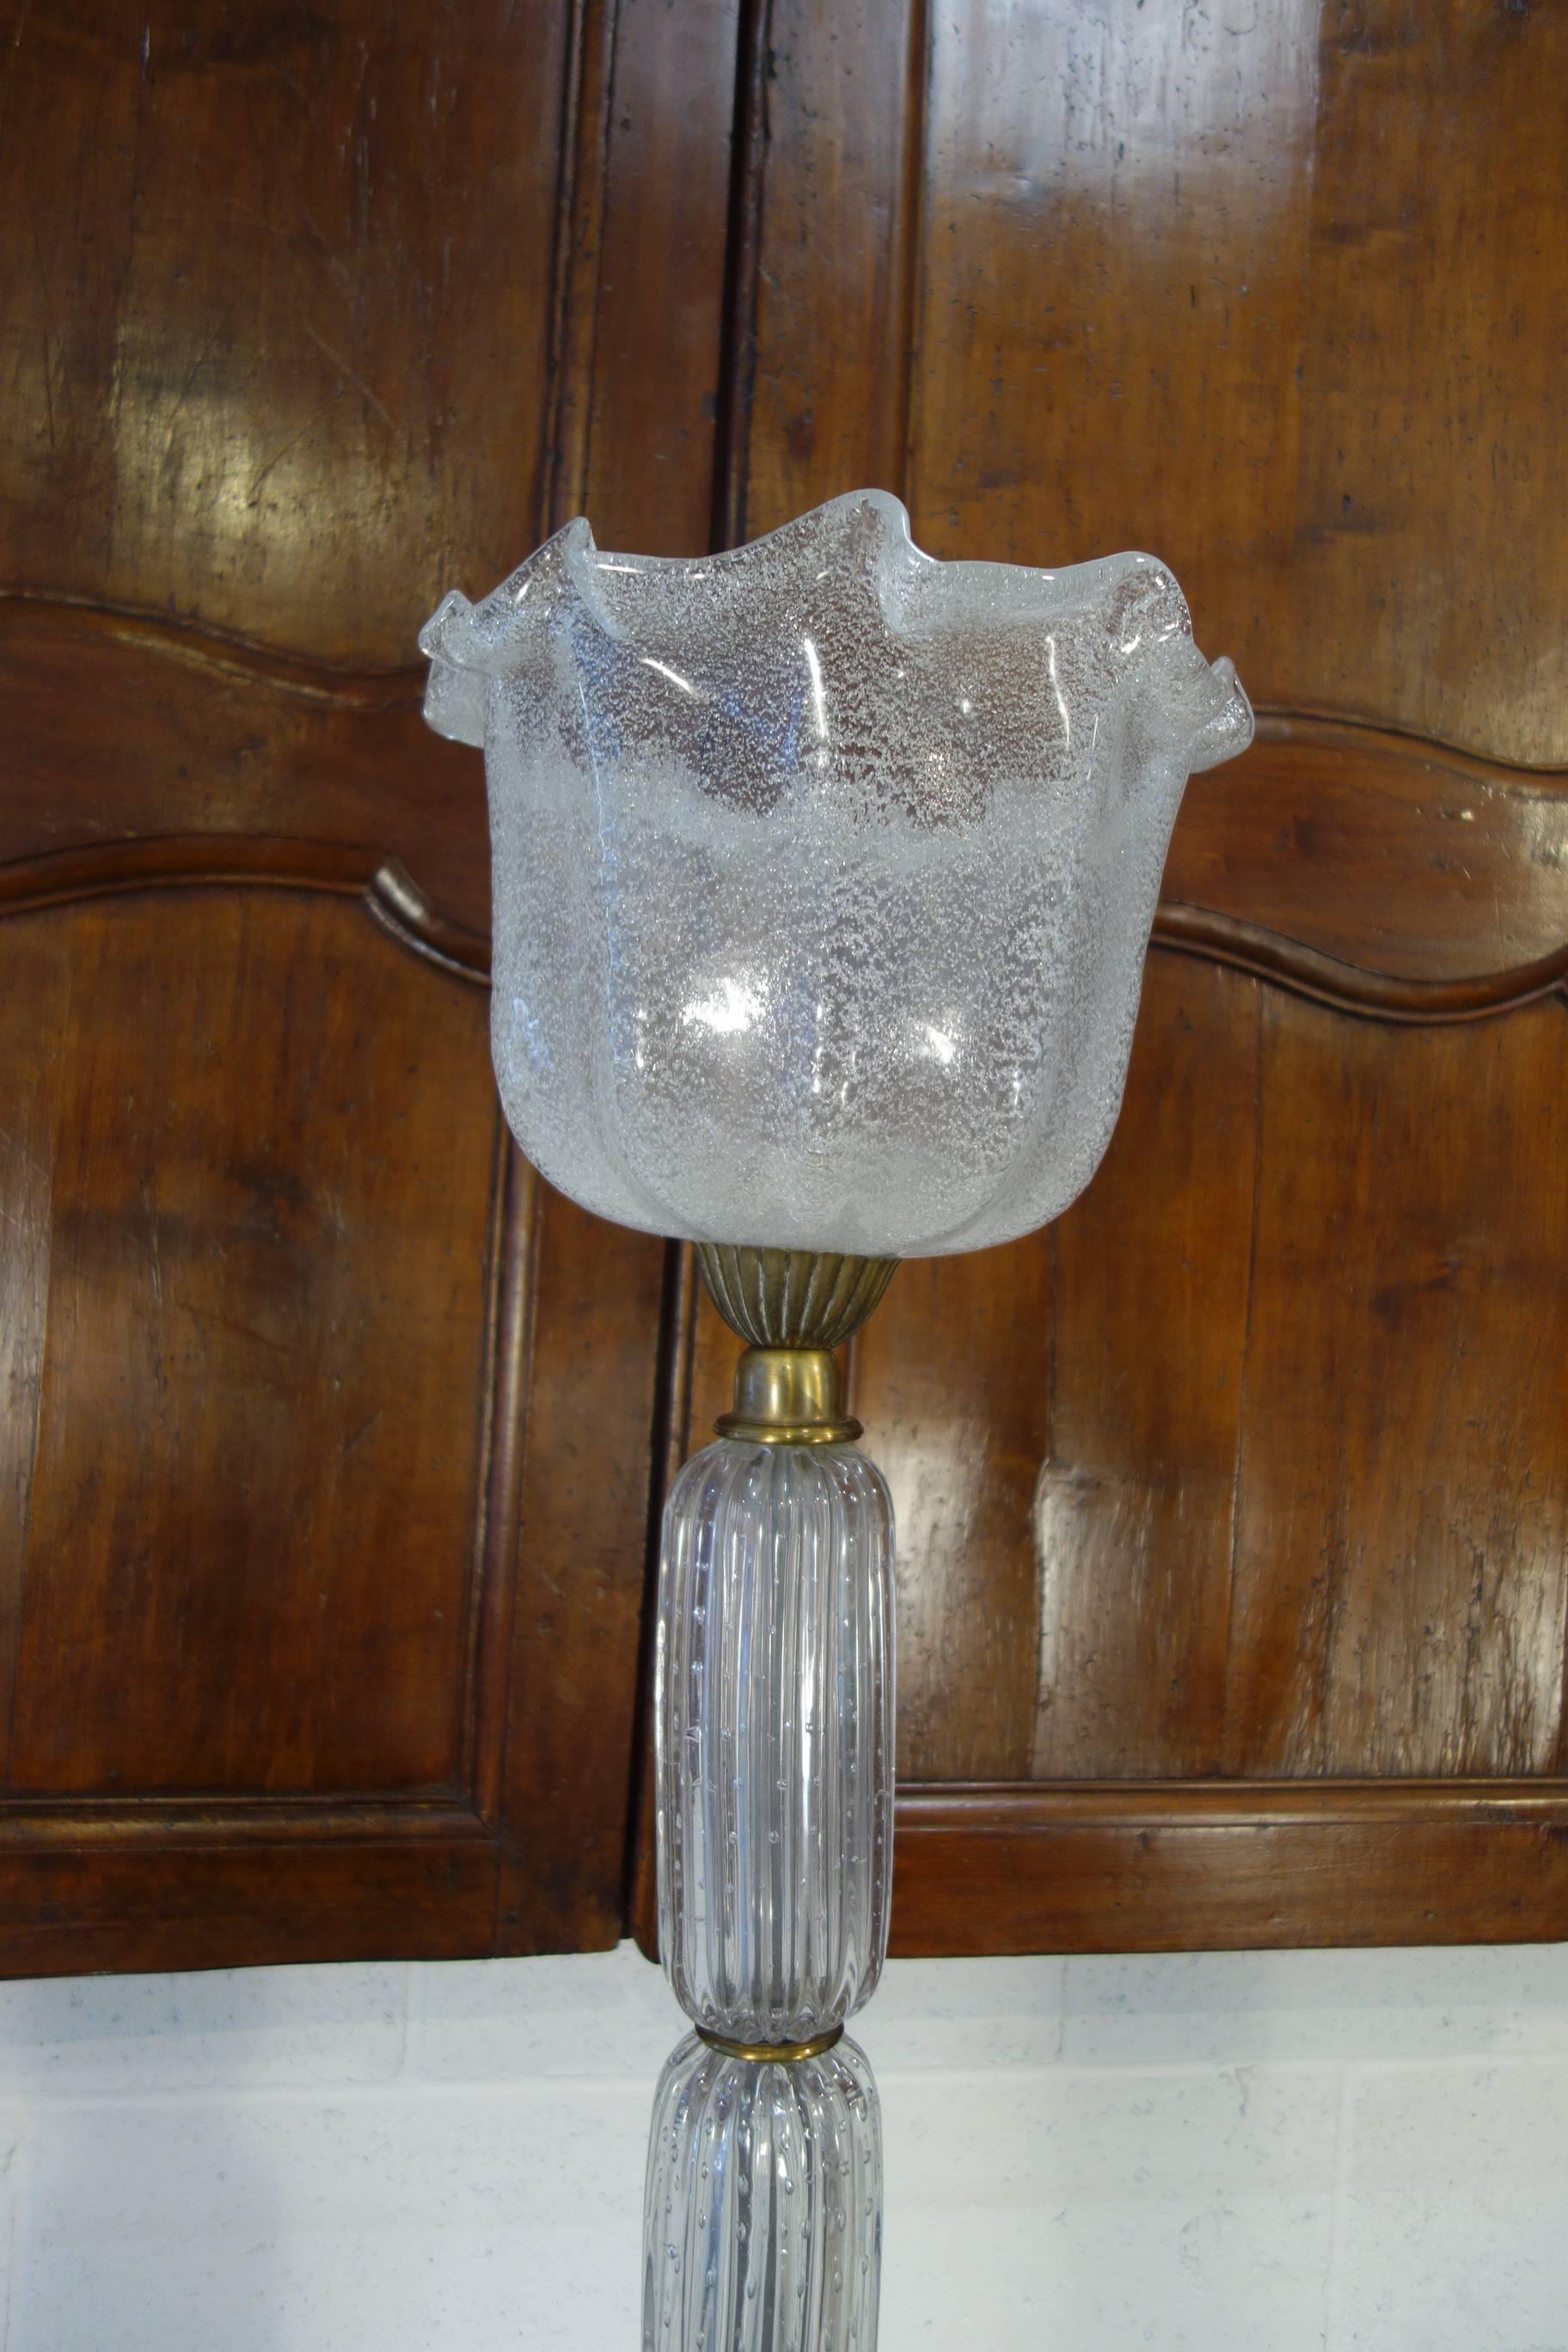 Classy Murano floor lamp with scalloped ice glass shade and segmented bubble glass on brass stand.  UL rewired.

Measures: 68